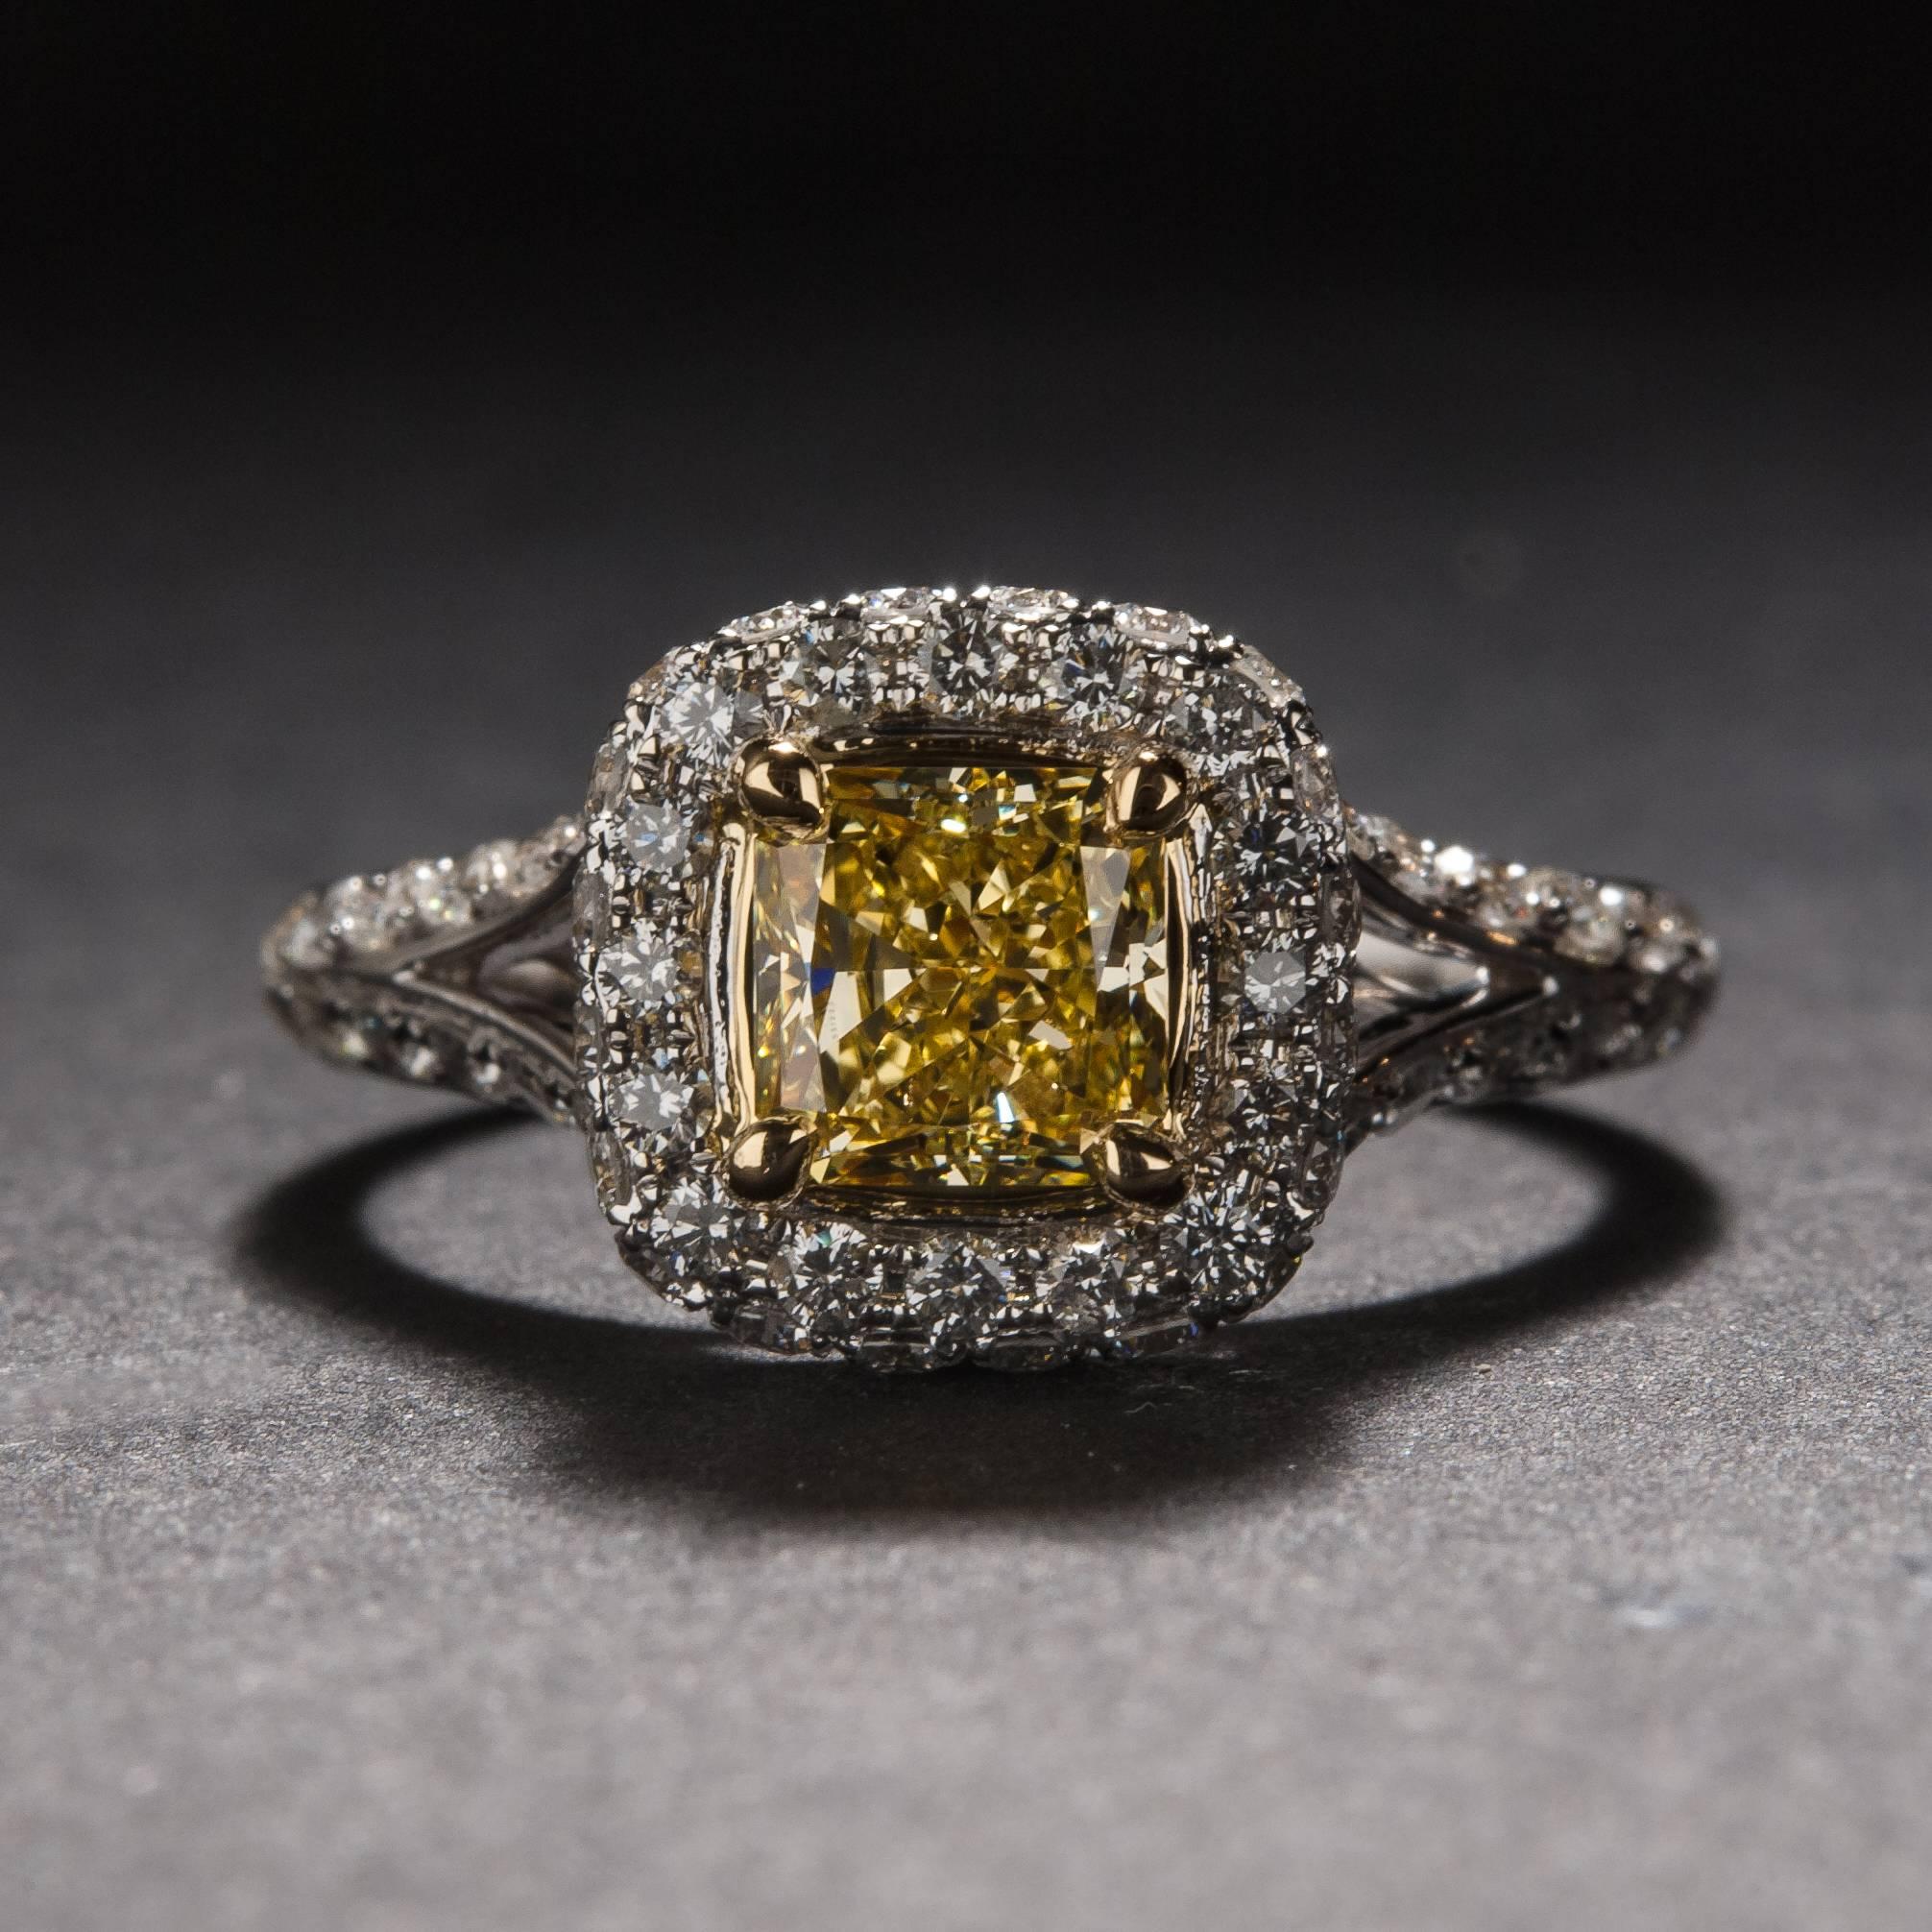 A stunning 1.00 carat fancy yellow diamond mounted in a beautiful split-shank setting with .87 total carats of white accent diamonds. The mounting is crafted in 18k white gold and it is currently size 7.